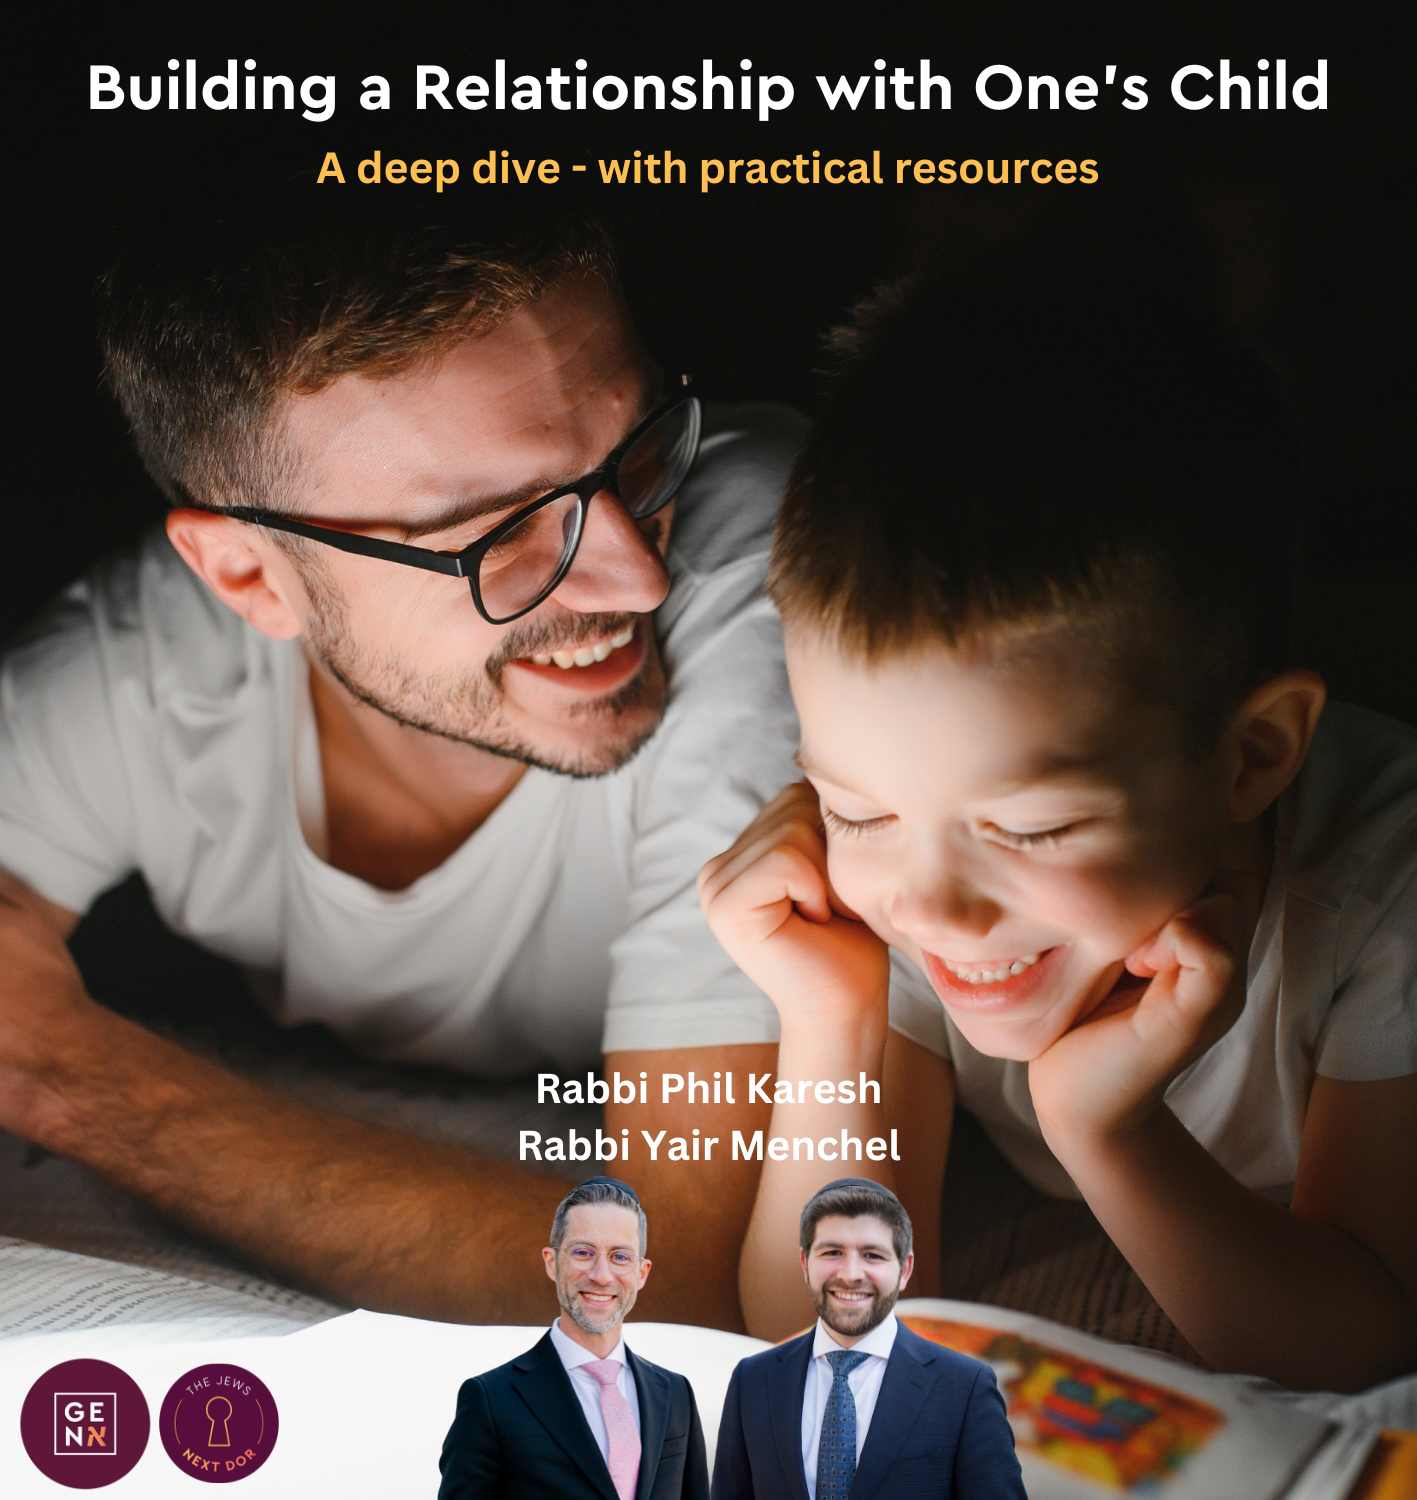 Building a Relationship with One’s Child